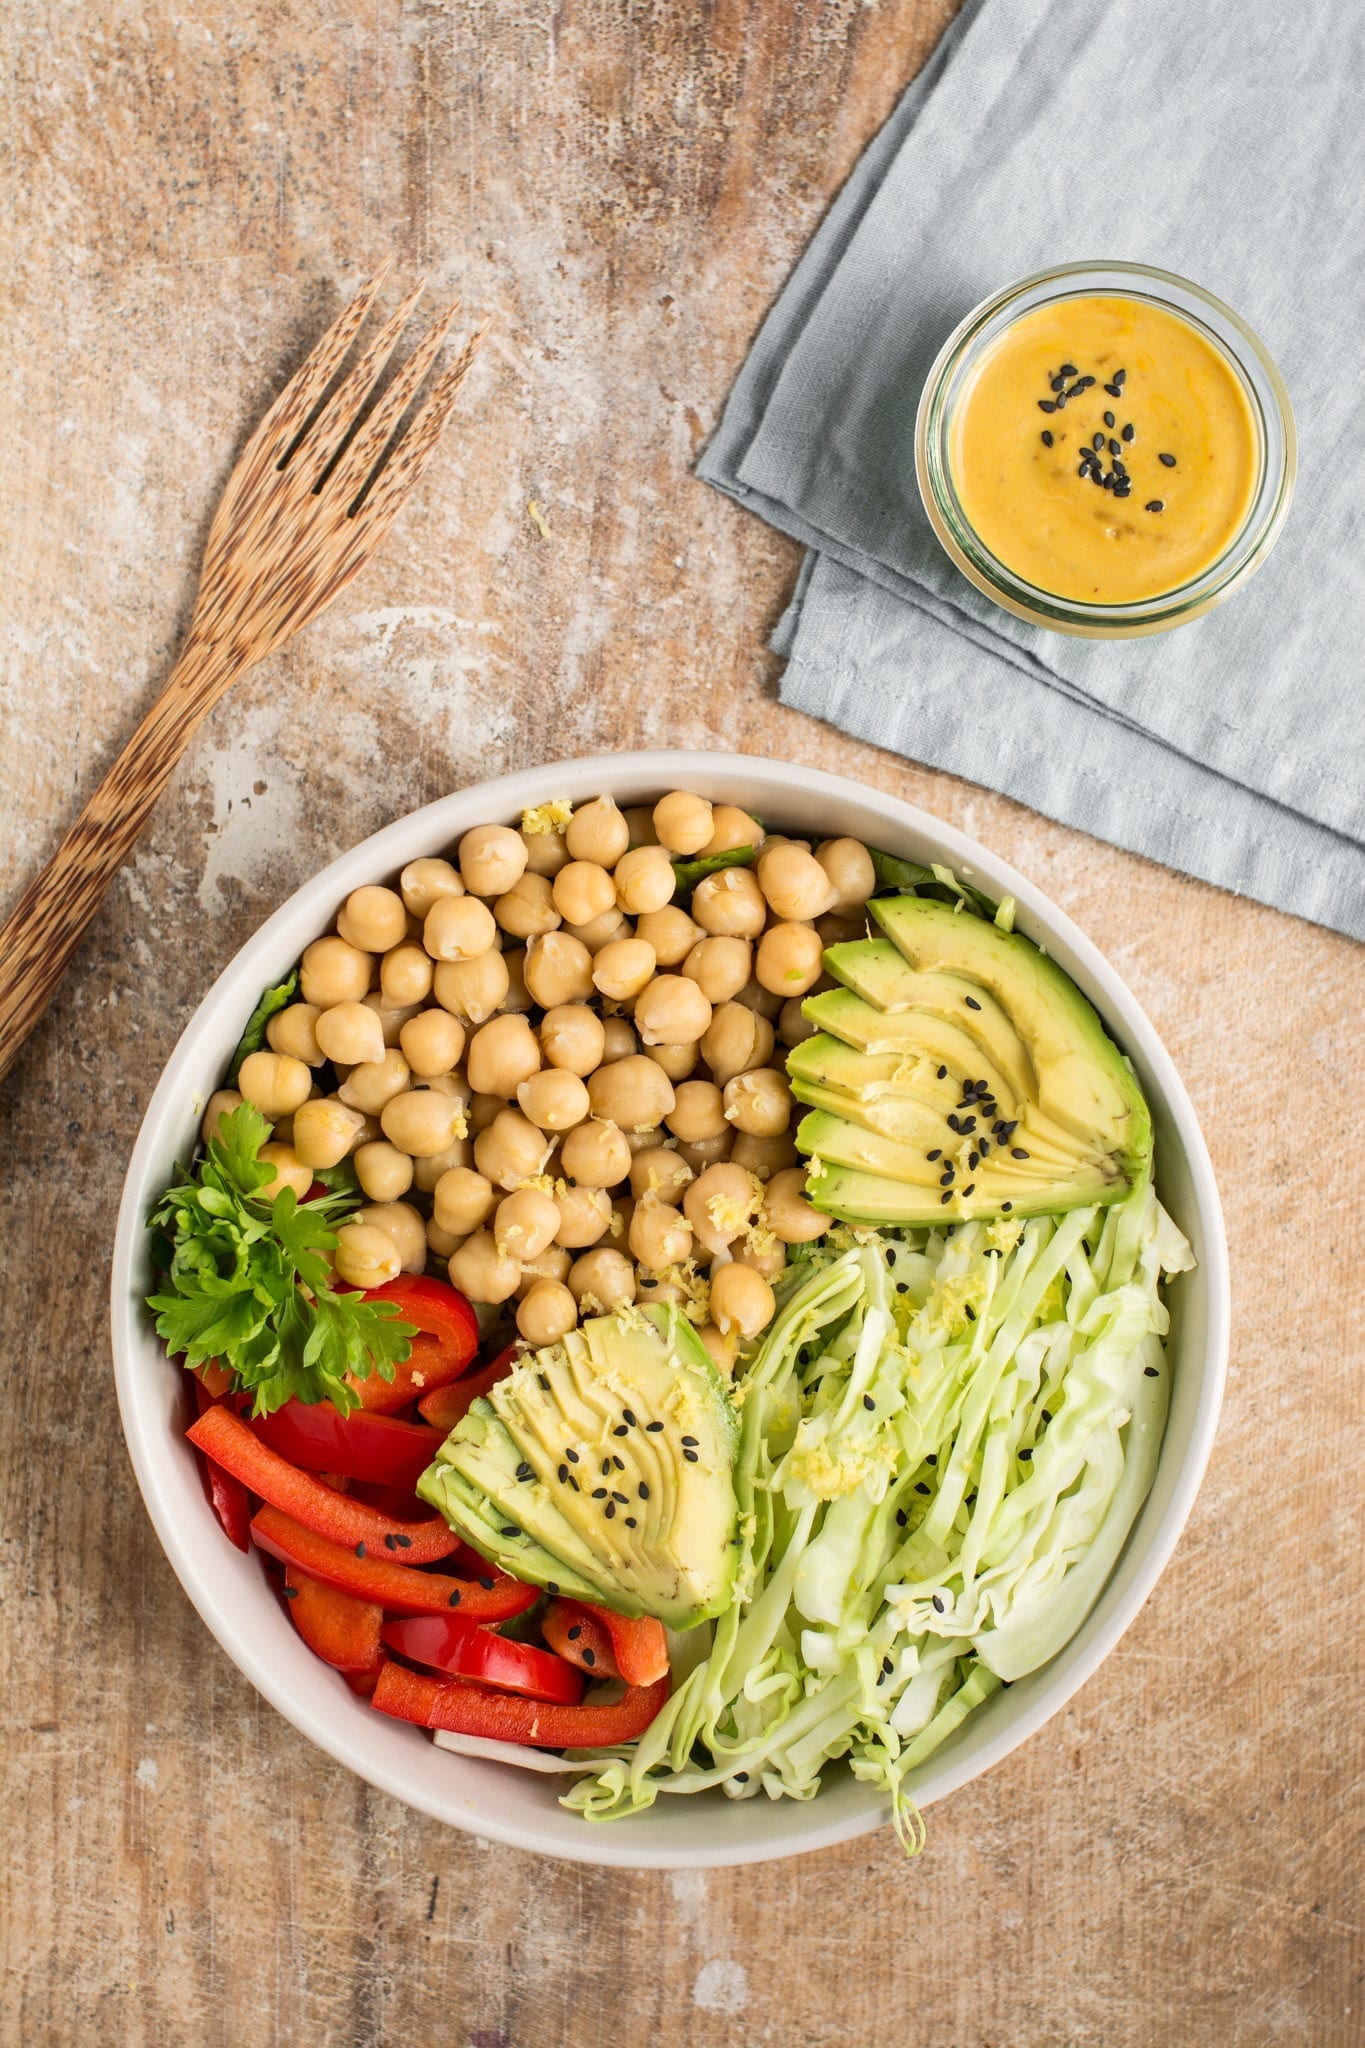 Dr. Greger's Daily Dozen meal plan Lunch Buddha Bowl